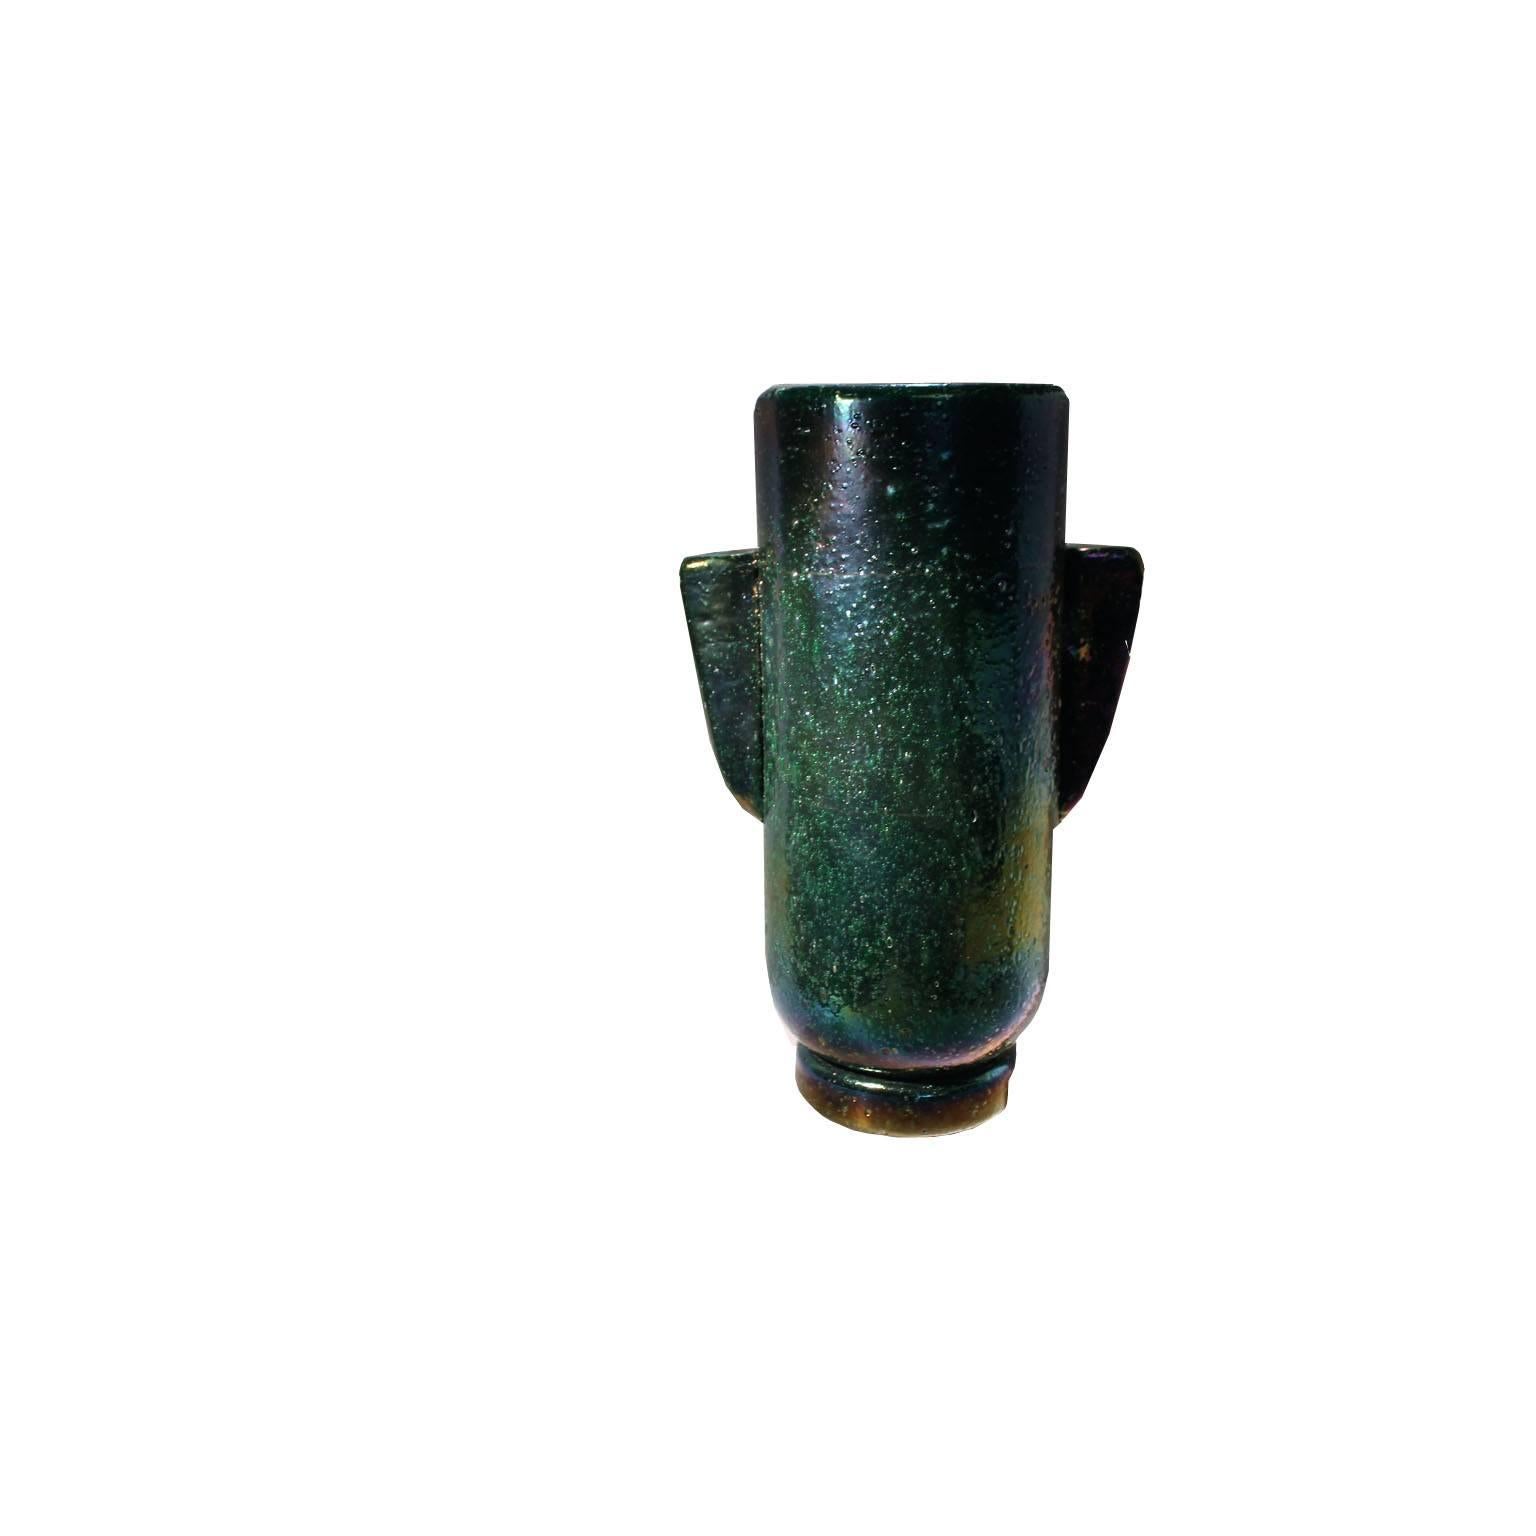 TOTEM vase by Carlo Scarpa. 
Deep green Pulegoso iiridized glass.
Original design of 1936.Produced in Murano until the 1955.
Venini 1940 scratched stamp on the base.